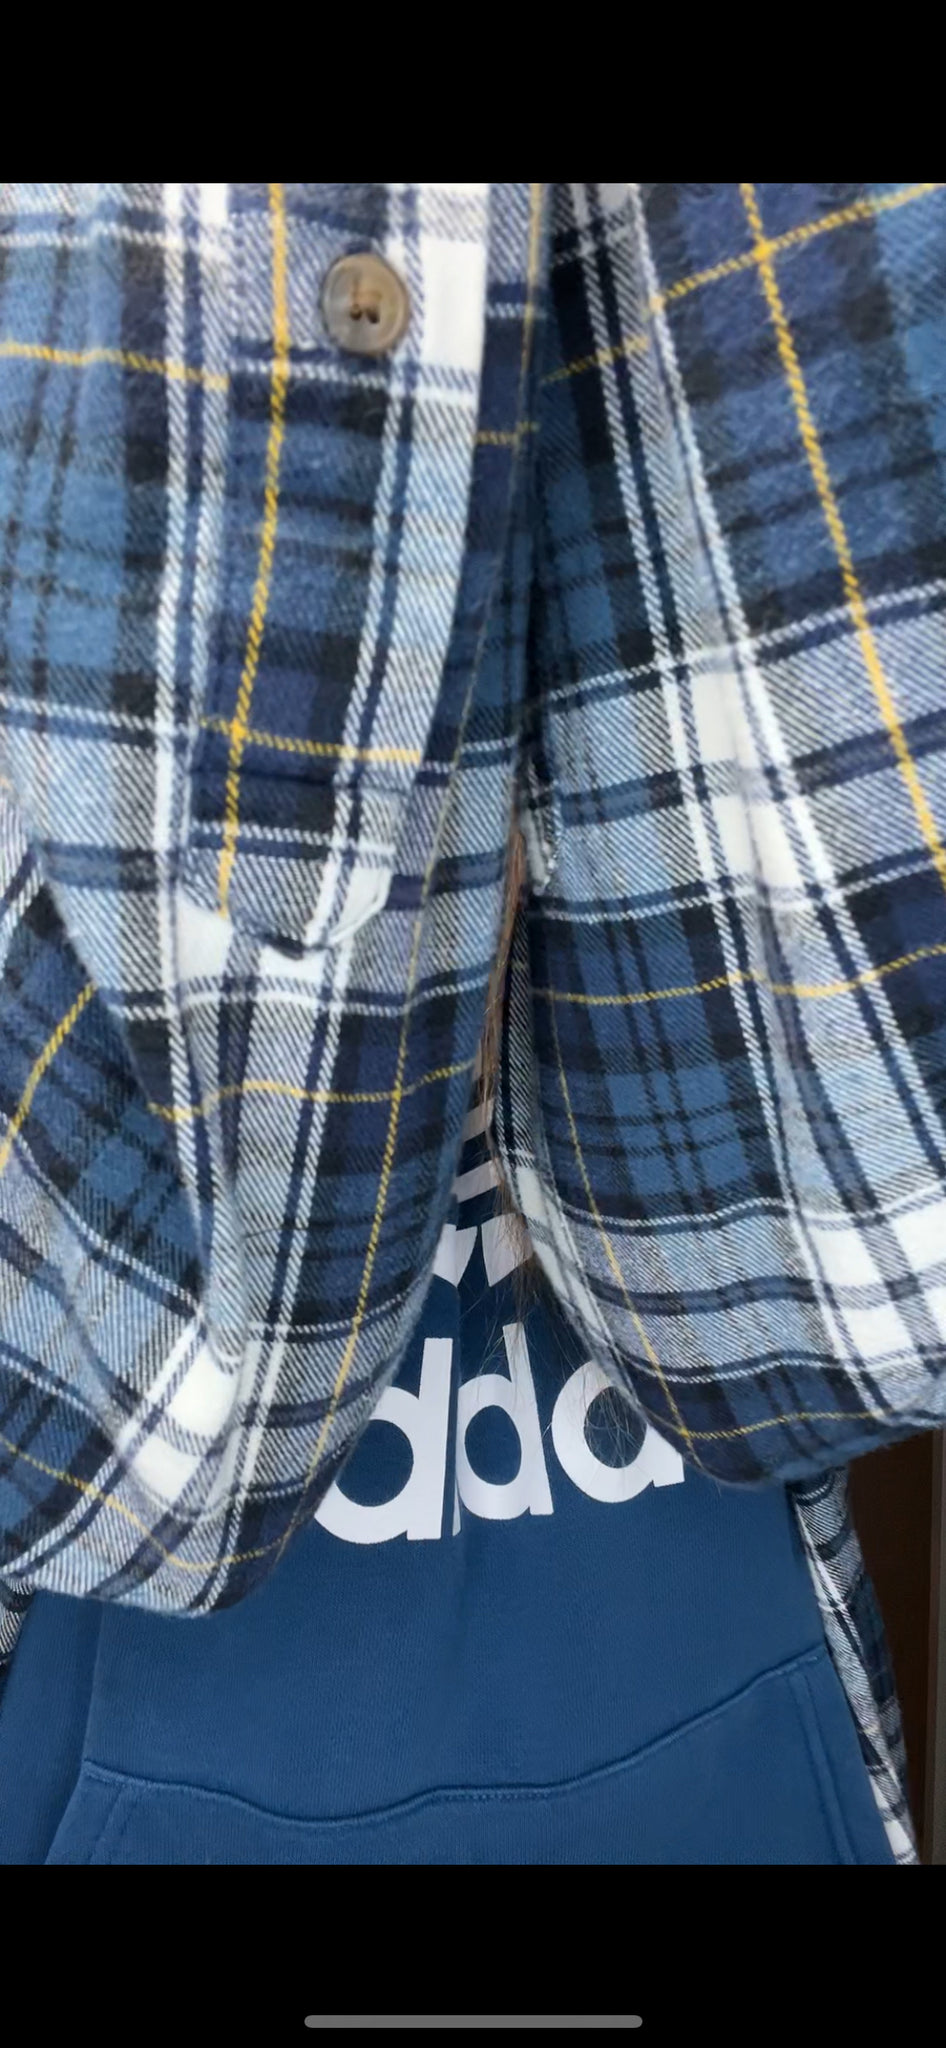 Upcycled Blue Adidas – women’s L/XL – midweight sweatshirt with flannel sleeves ￼